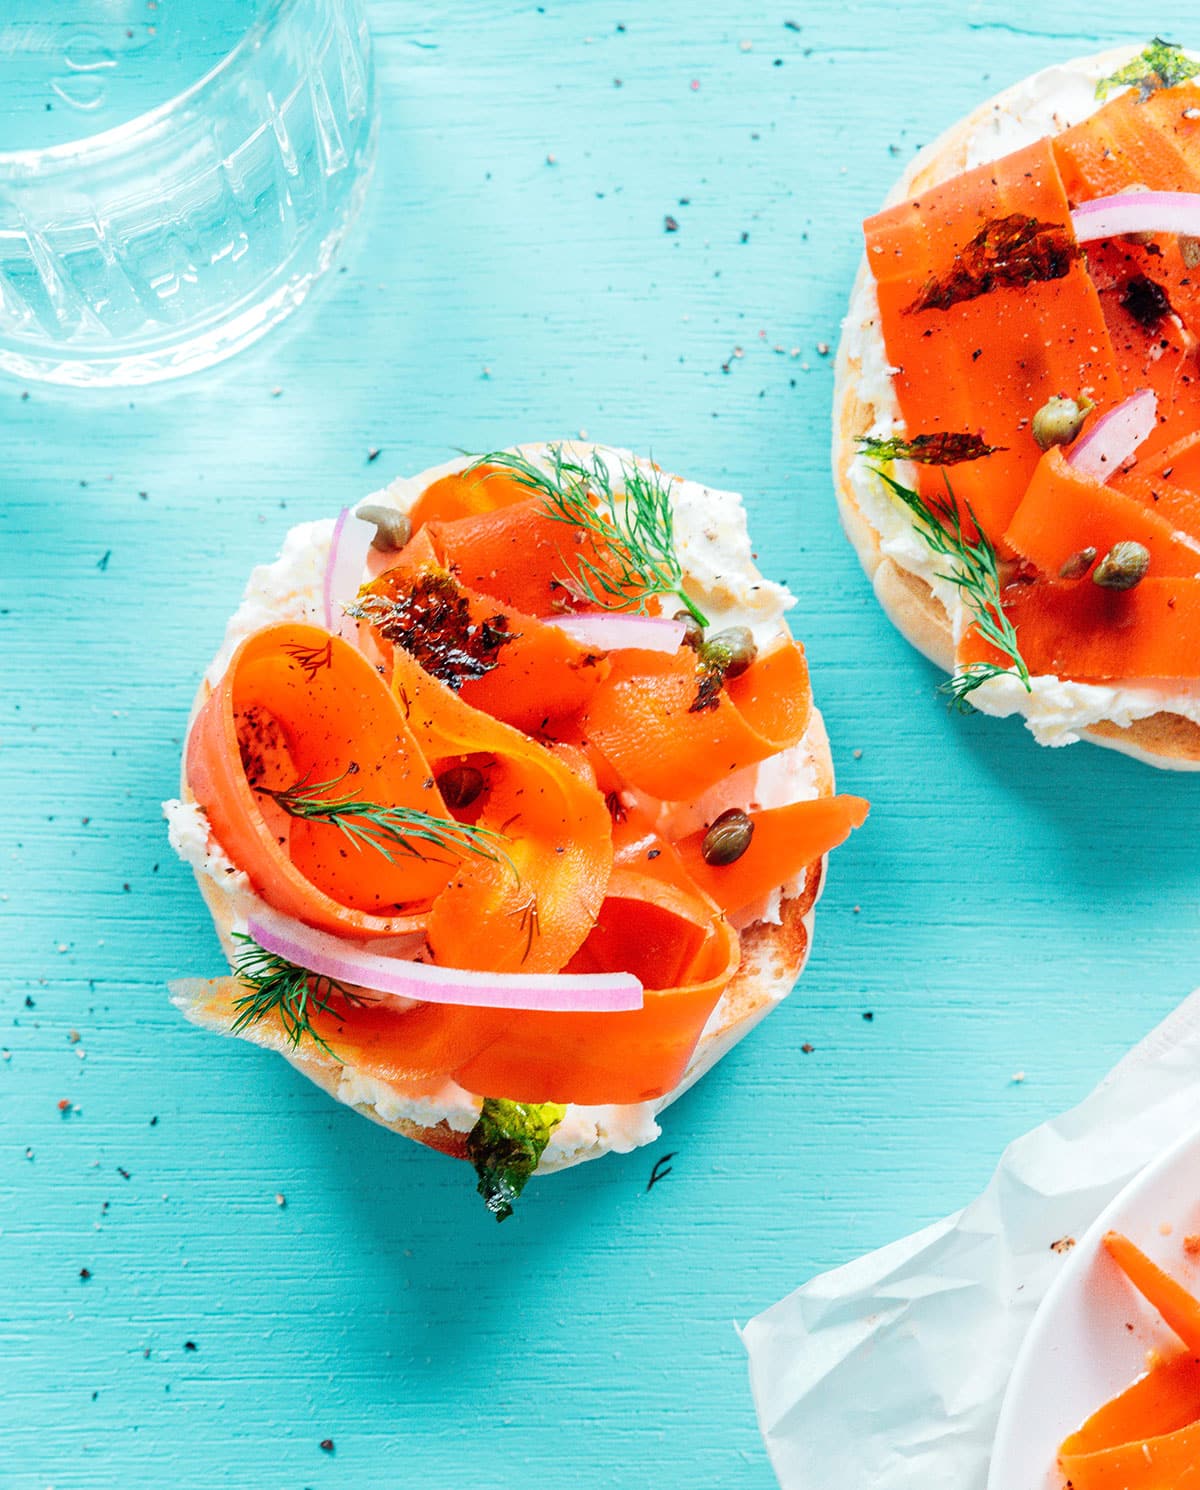 Bagel with cream cheese, carrot lox, capers, and red onions.